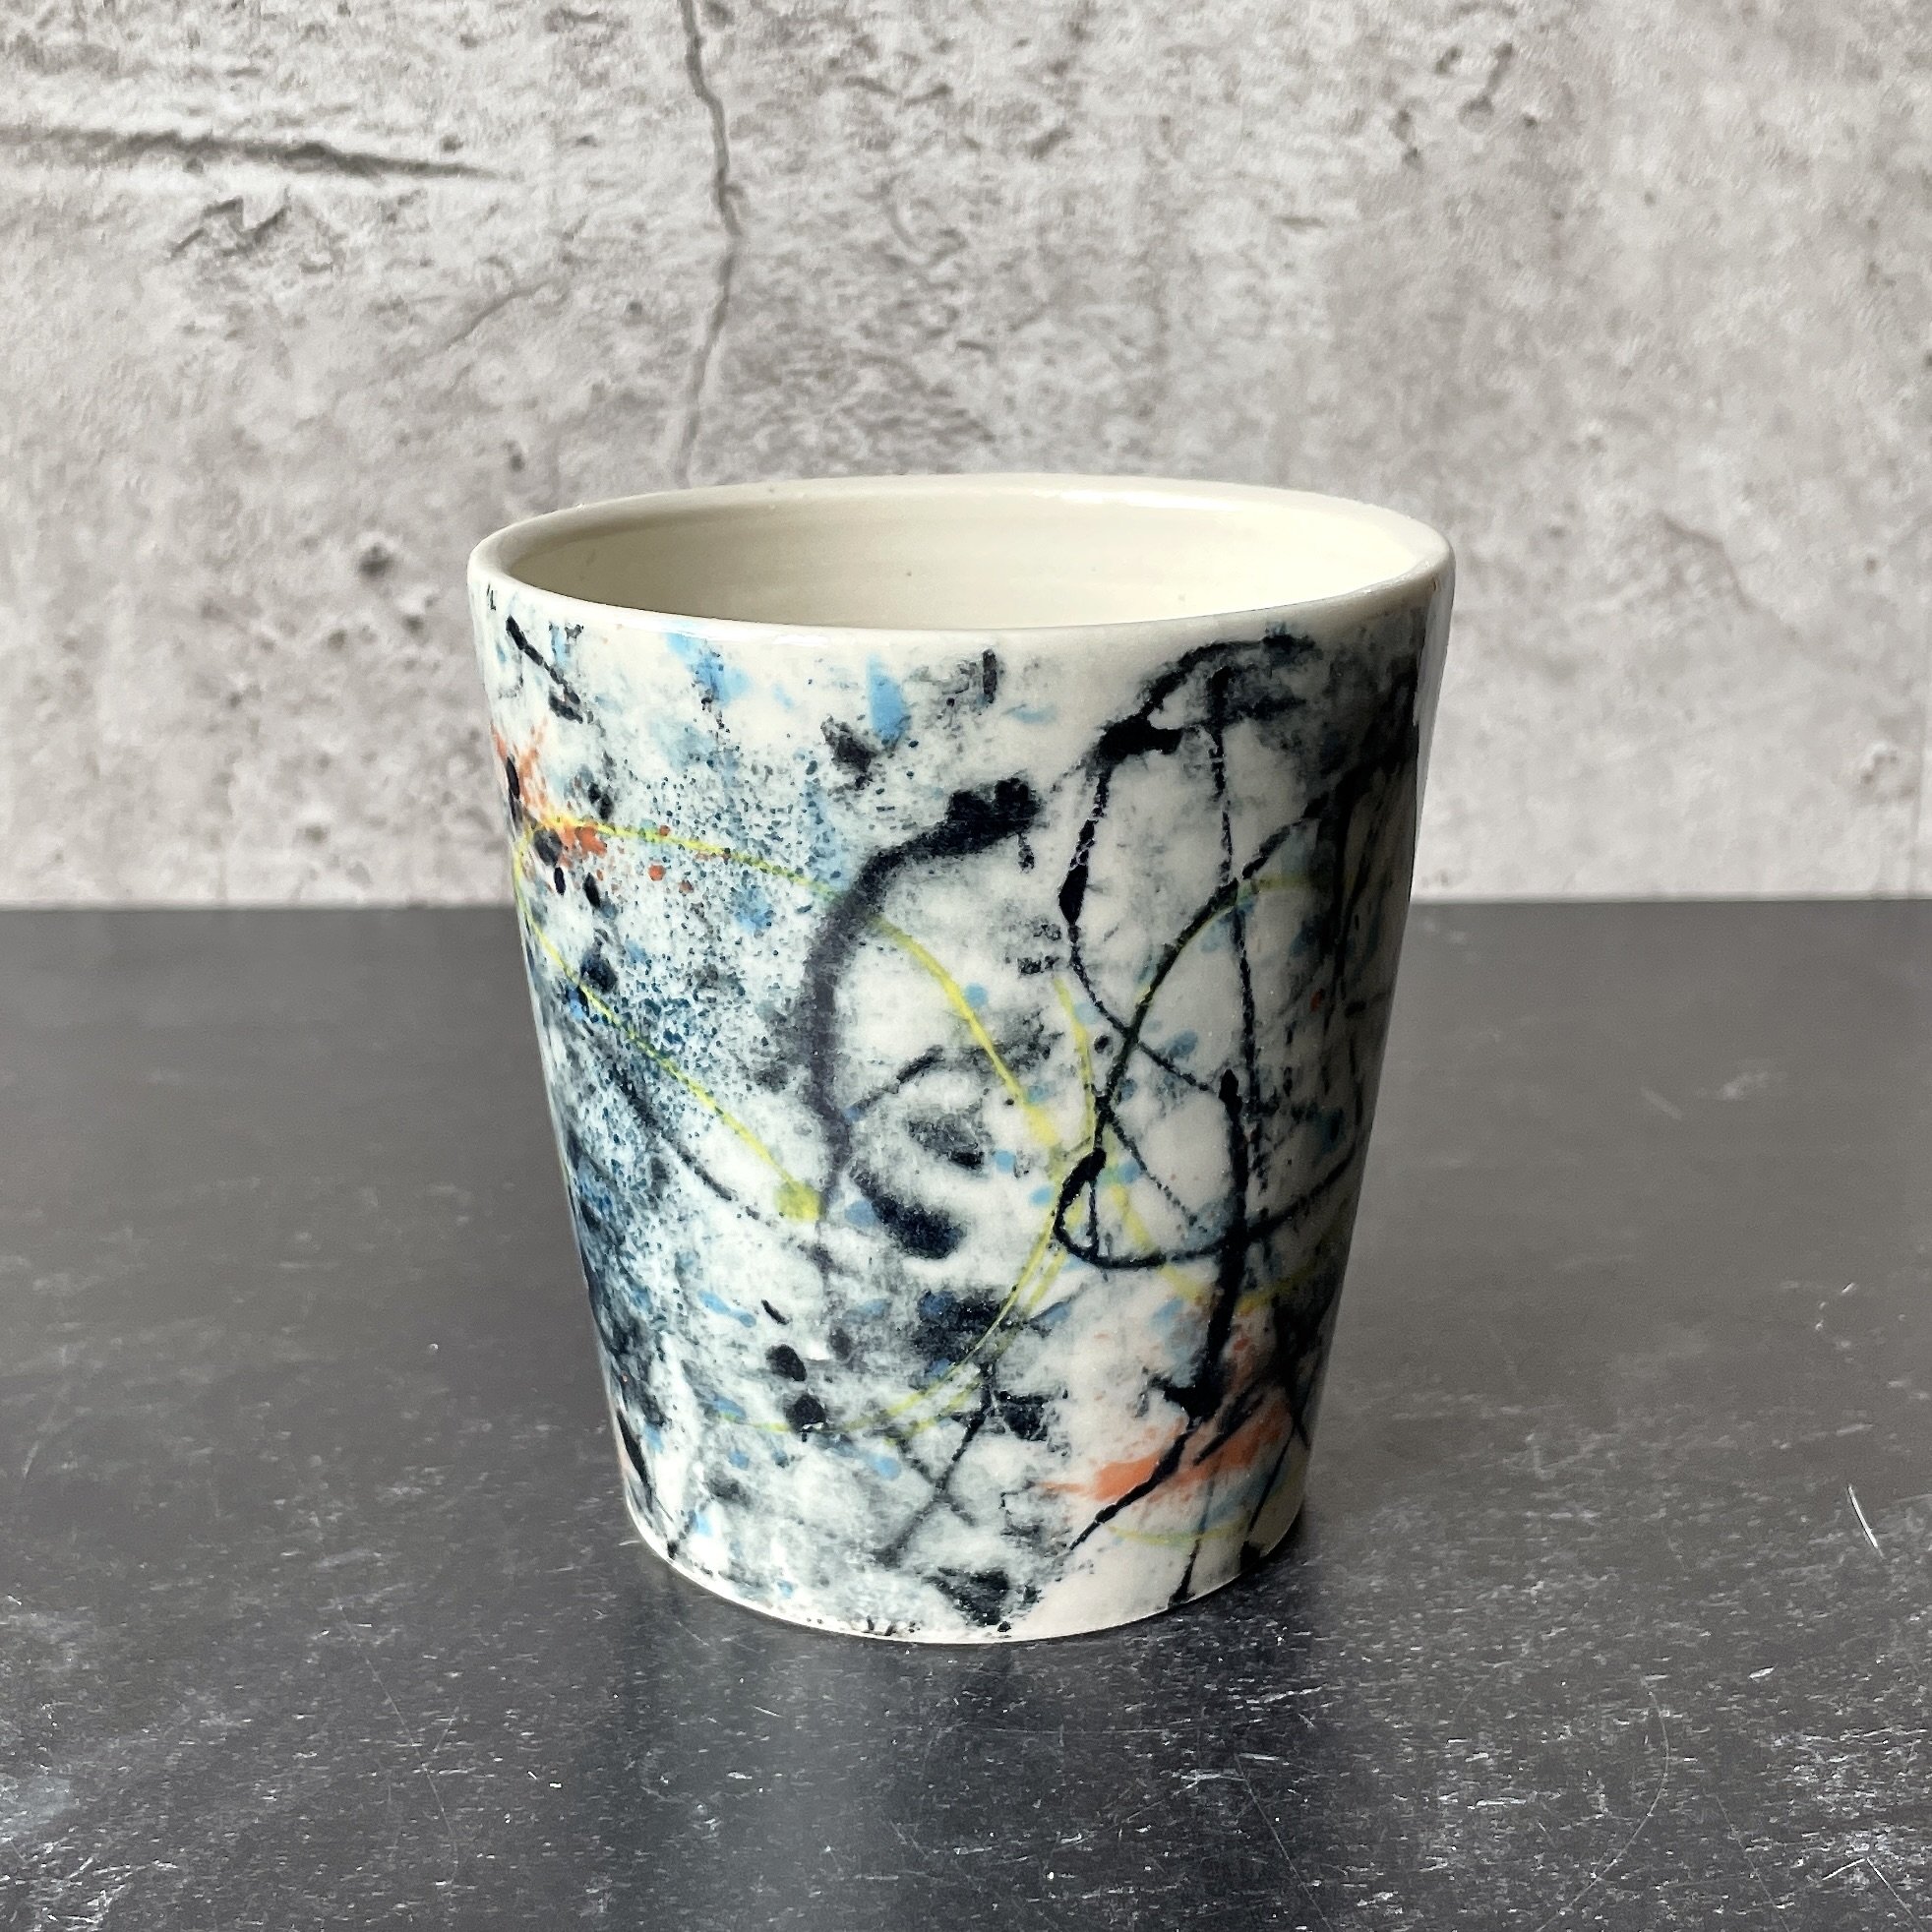 Handmade Porcelain Cup with Modern Graphic Design